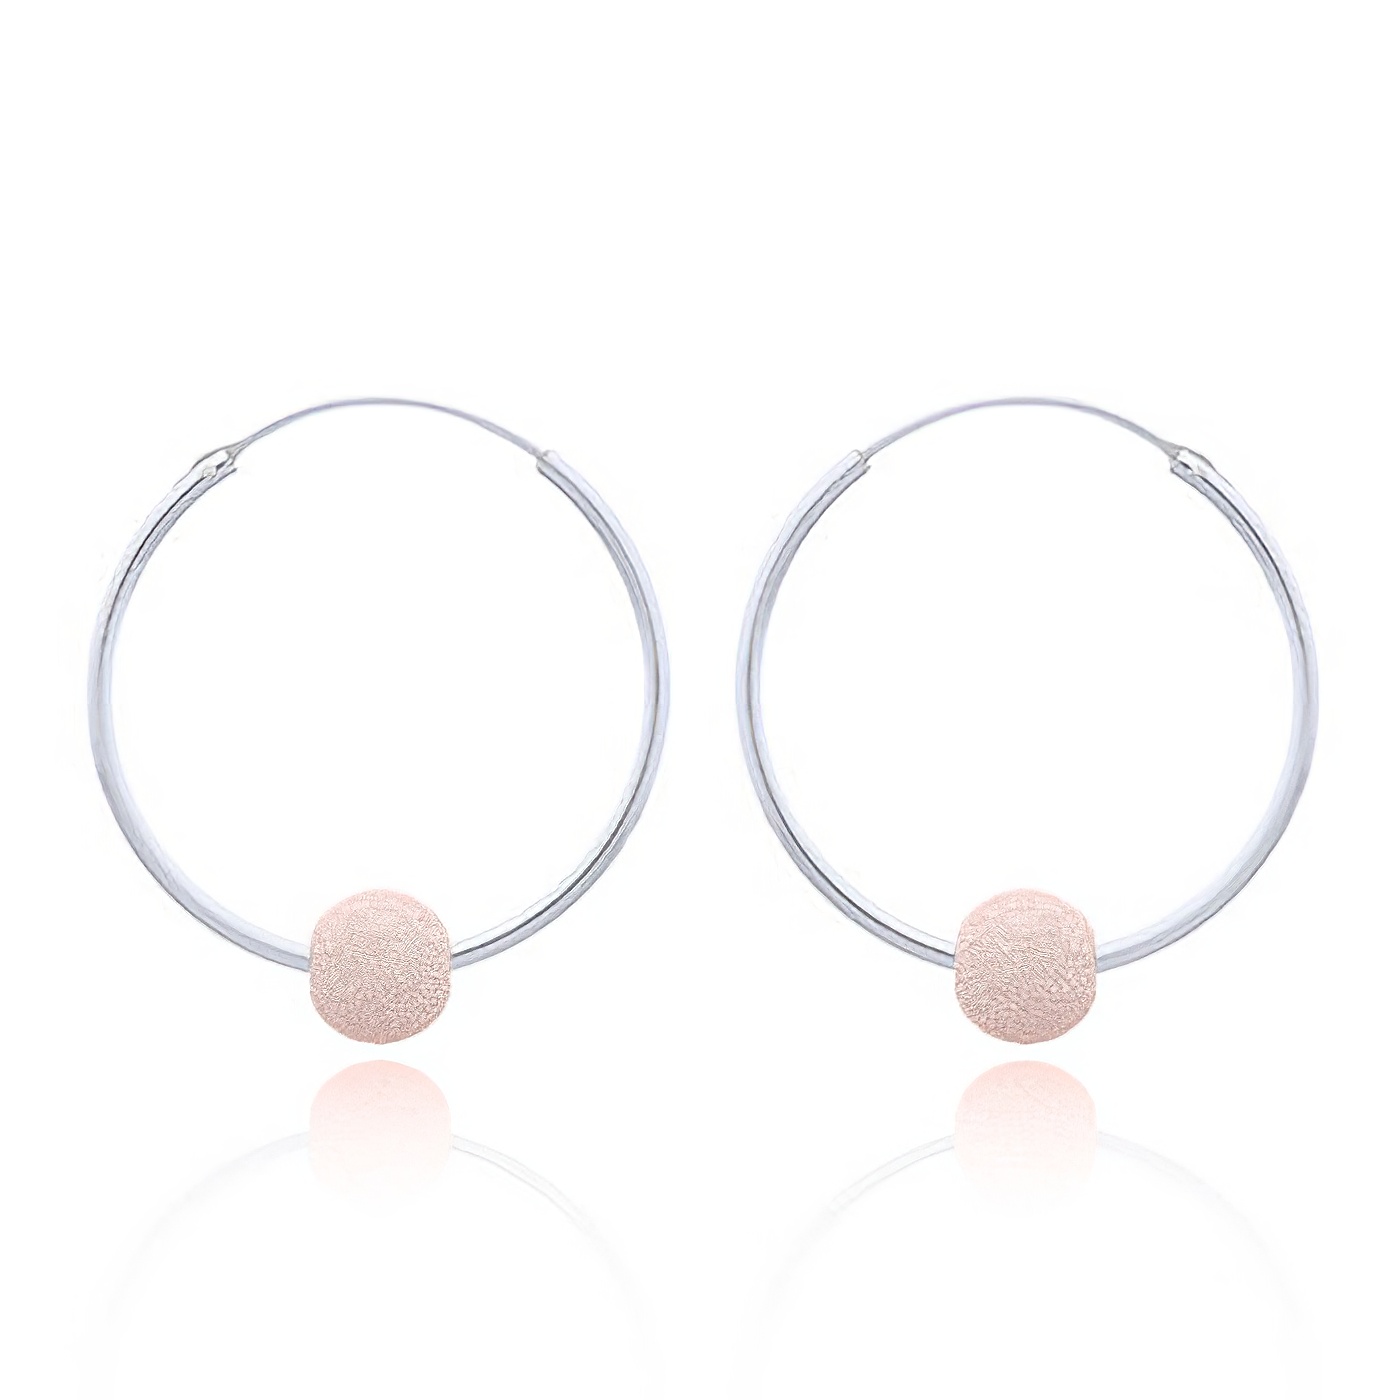 Sparkling Rose Gold Ball Silver Hoop Earrings by BeYindi 